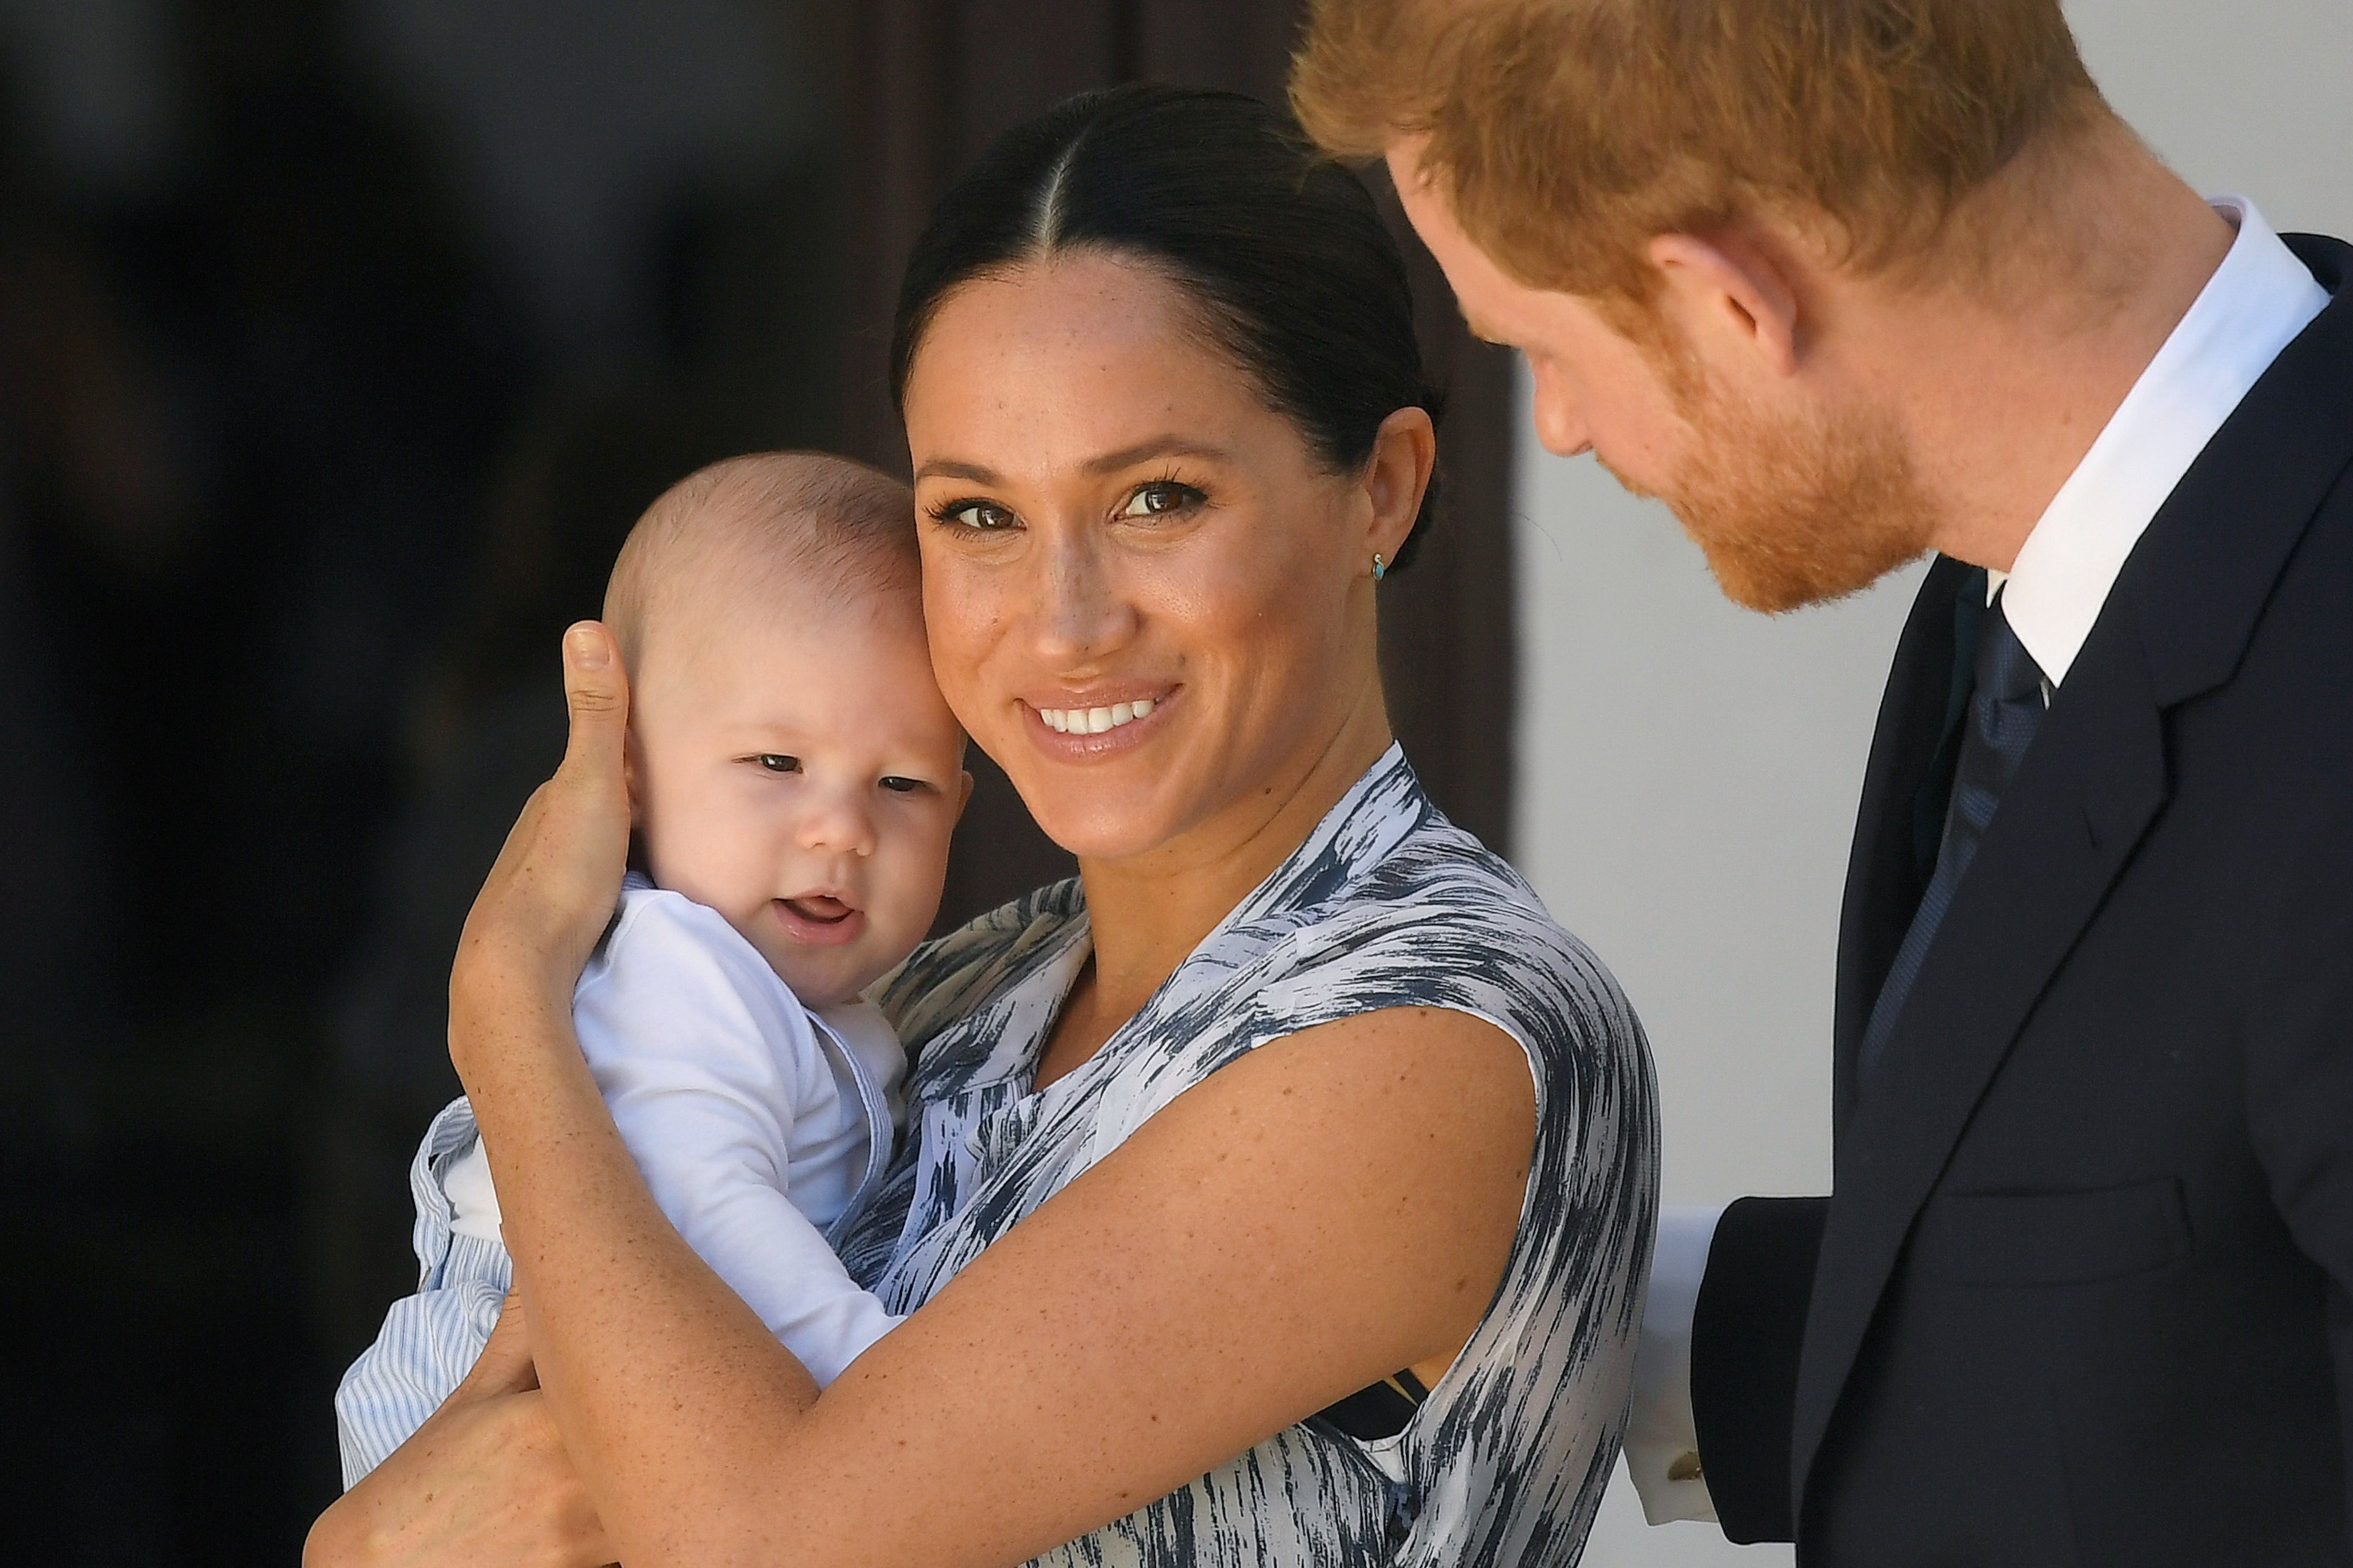 Meghan and Harry dramatically quit the royal family in 2020 shortly after the birth of their son Archie